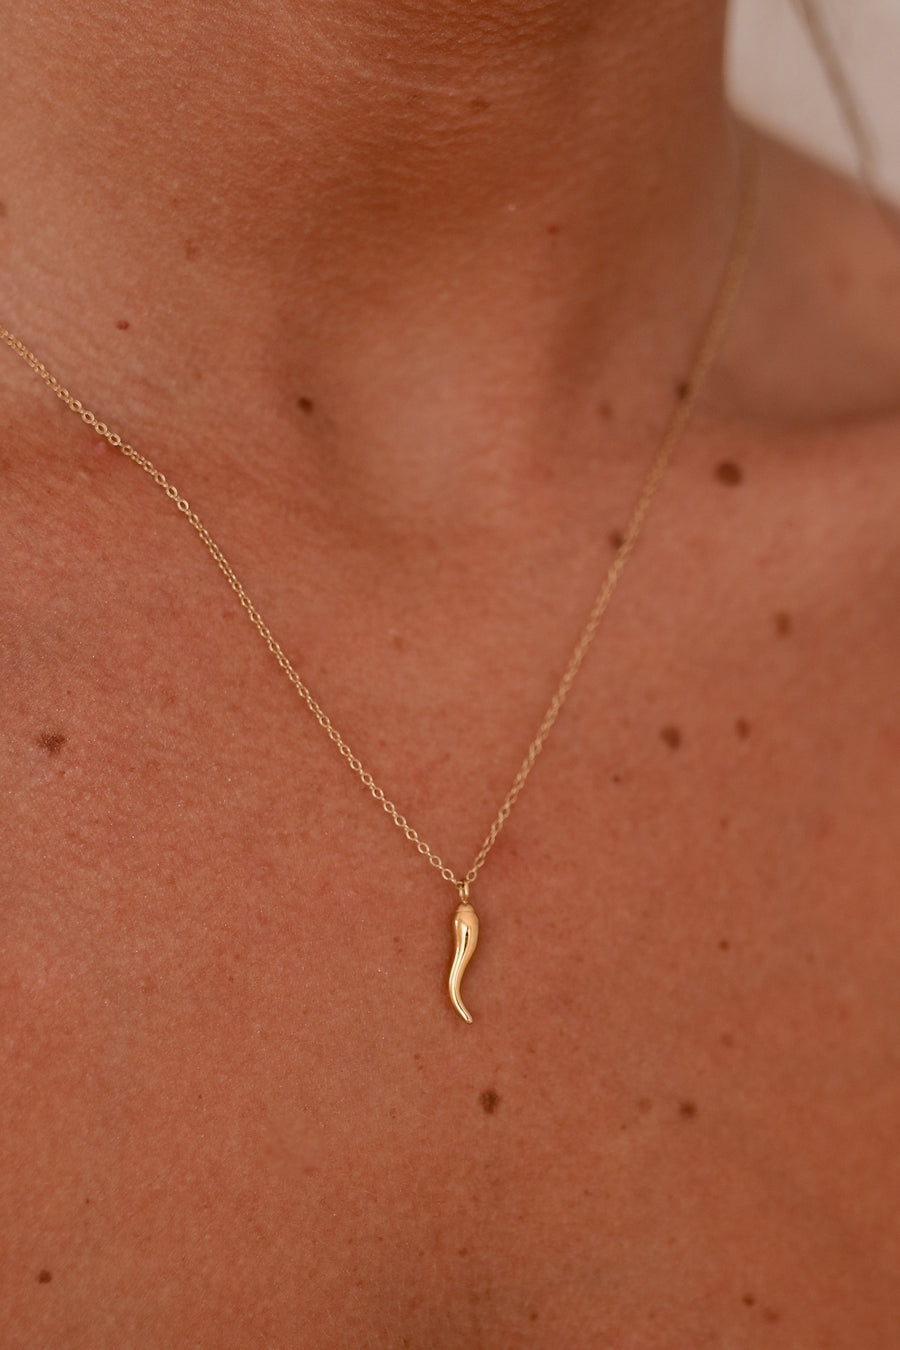 Cornicello - Stainless Steel Gold or Silver Necklace